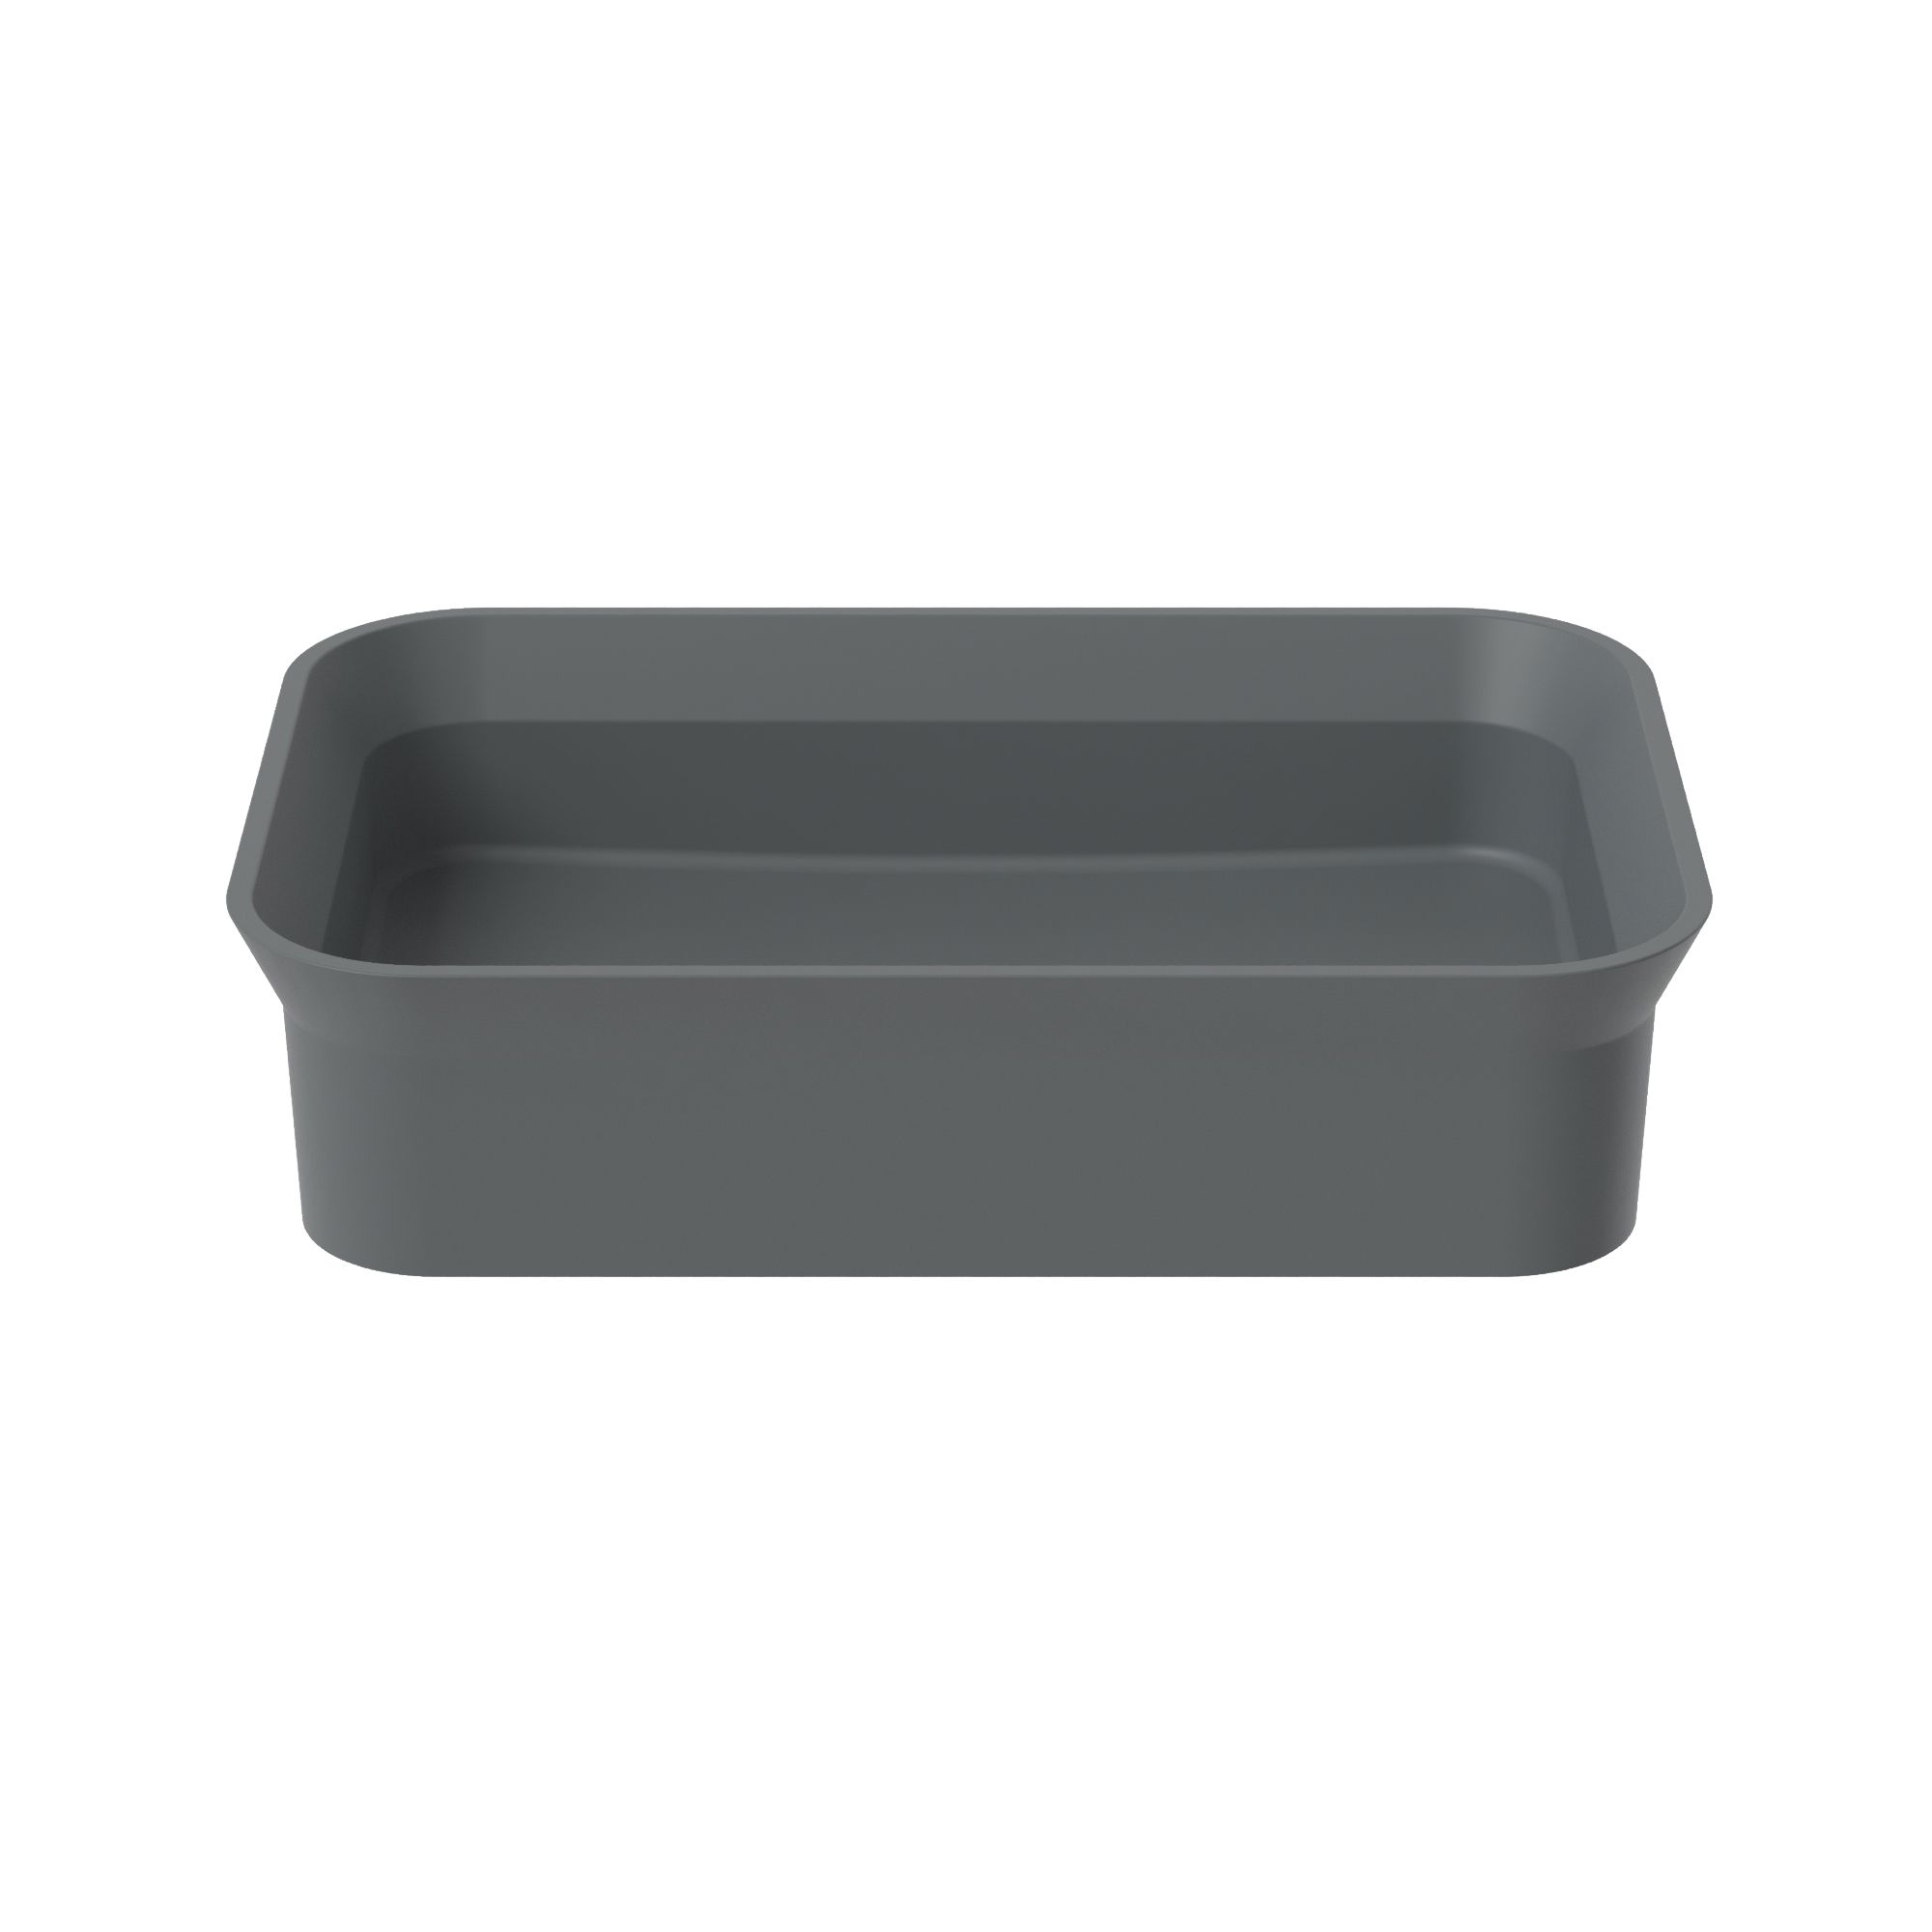 The Ayla Countertop Basin & Waste Cover 400x400mm